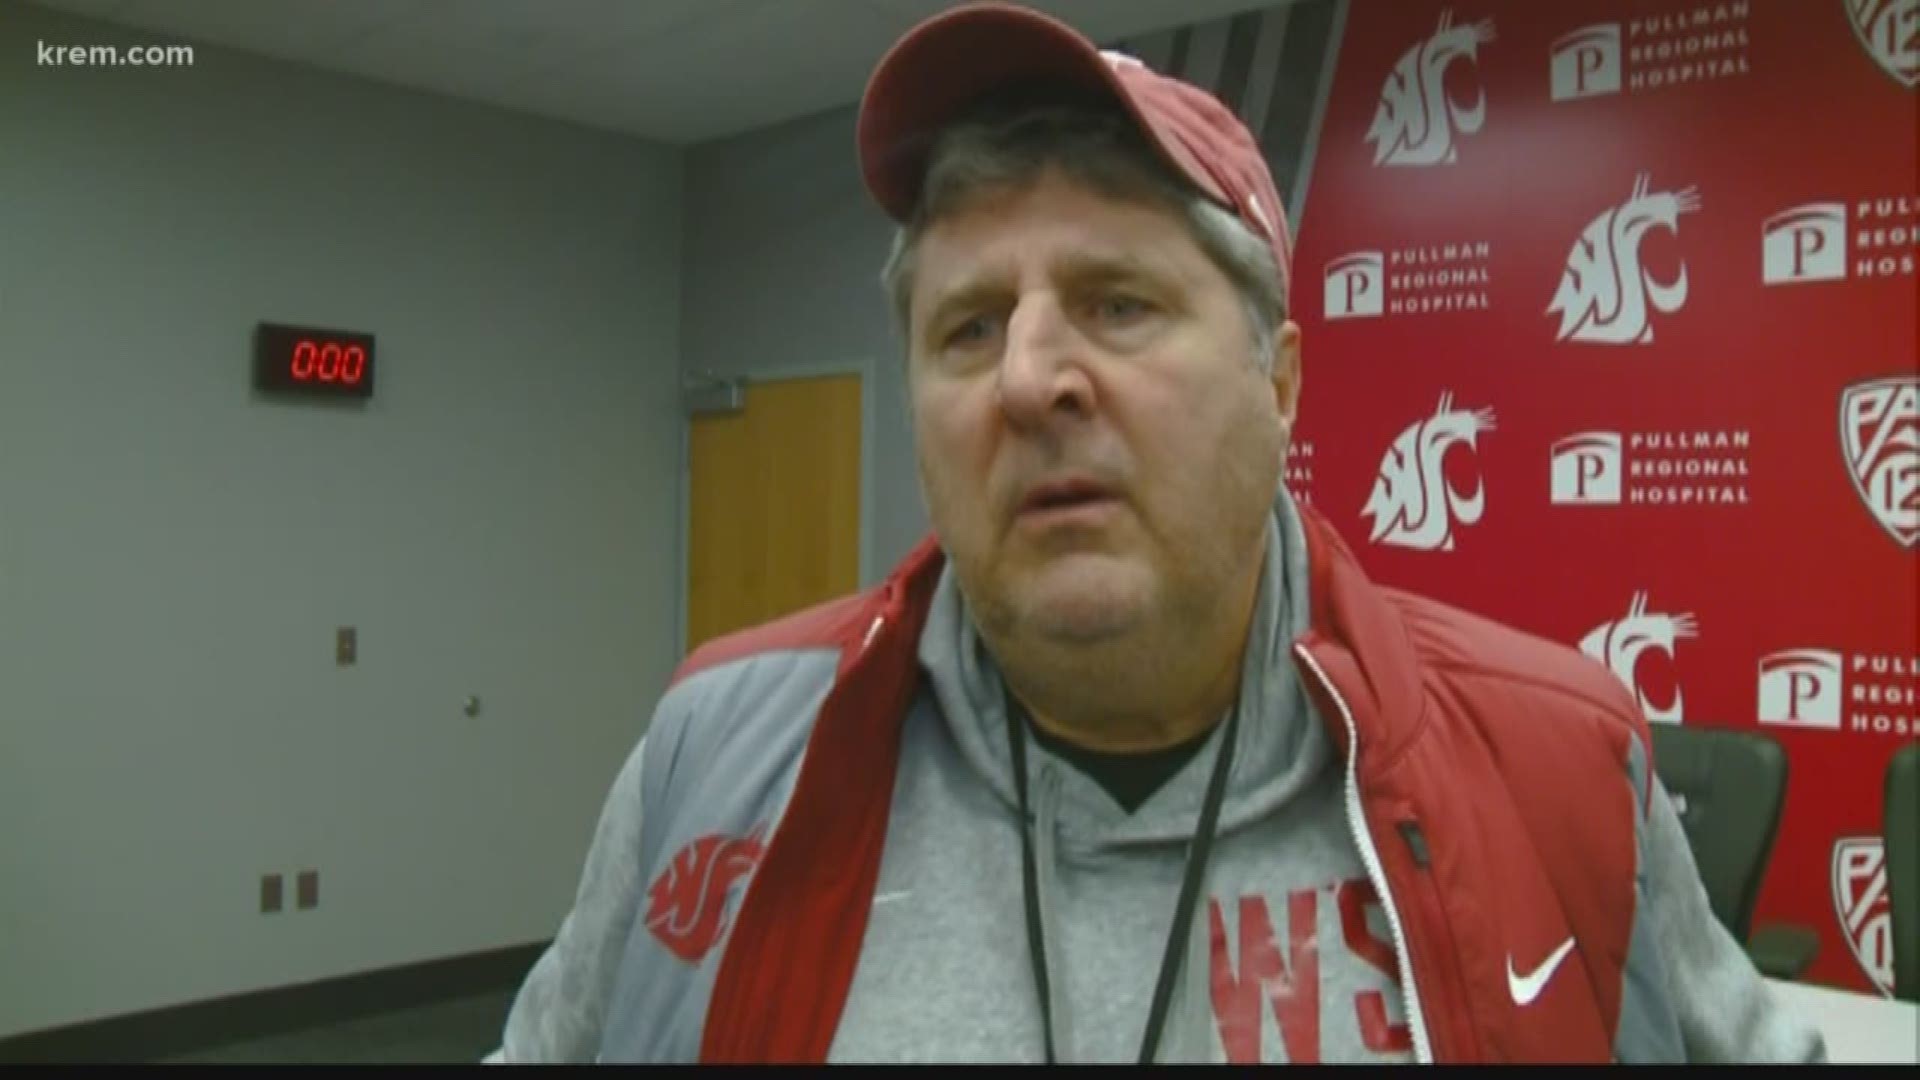 Leach told KREM's Karthik Venkataraman he never planned on leaving WSU. He signed a contract extension through 2024 on Thursday.